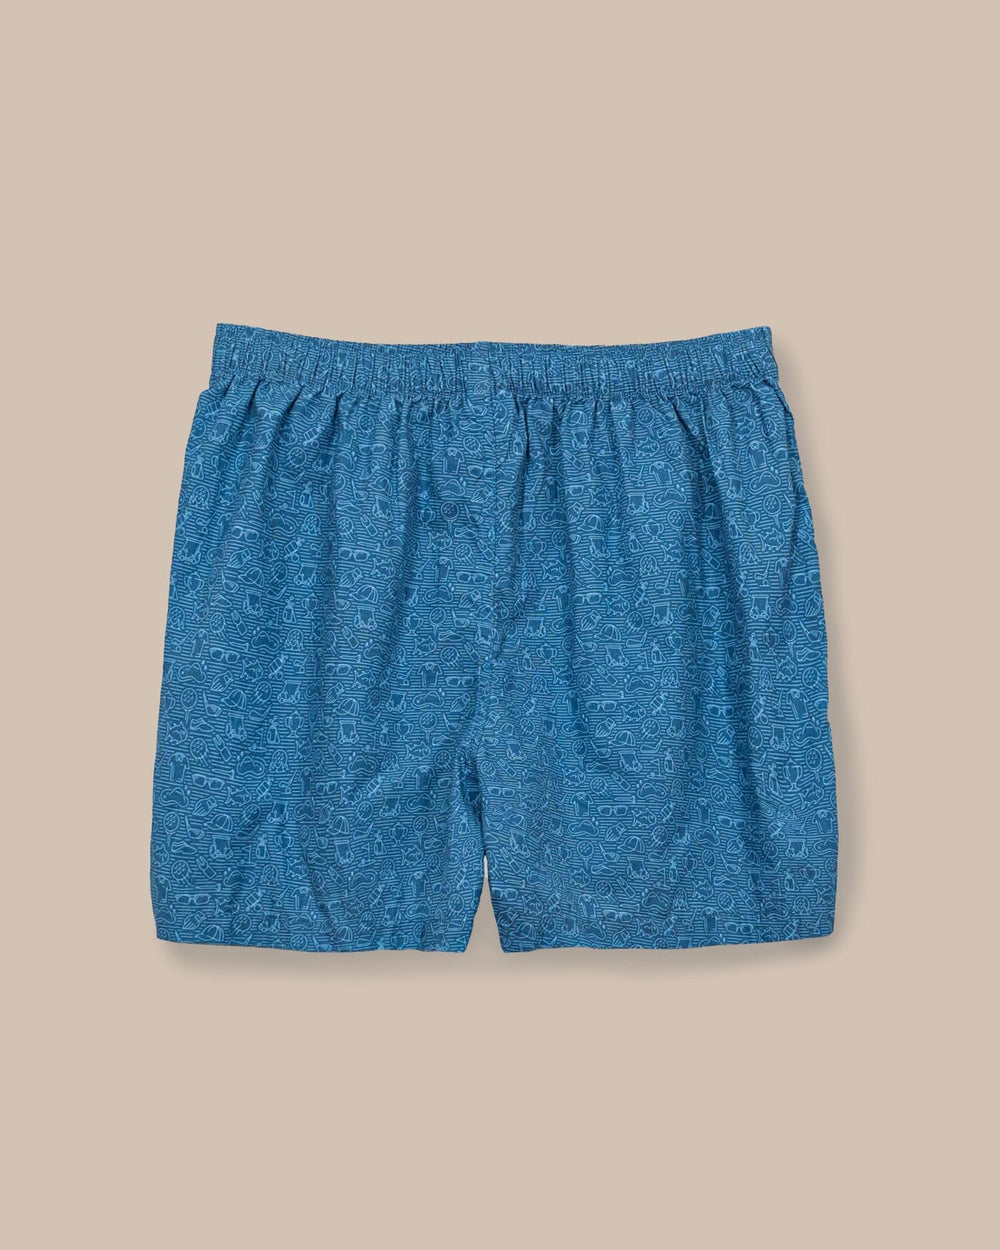 The back view of the Southern Tide Let's Go Clubbing Boxer by Southern Tide - Coronet Blue